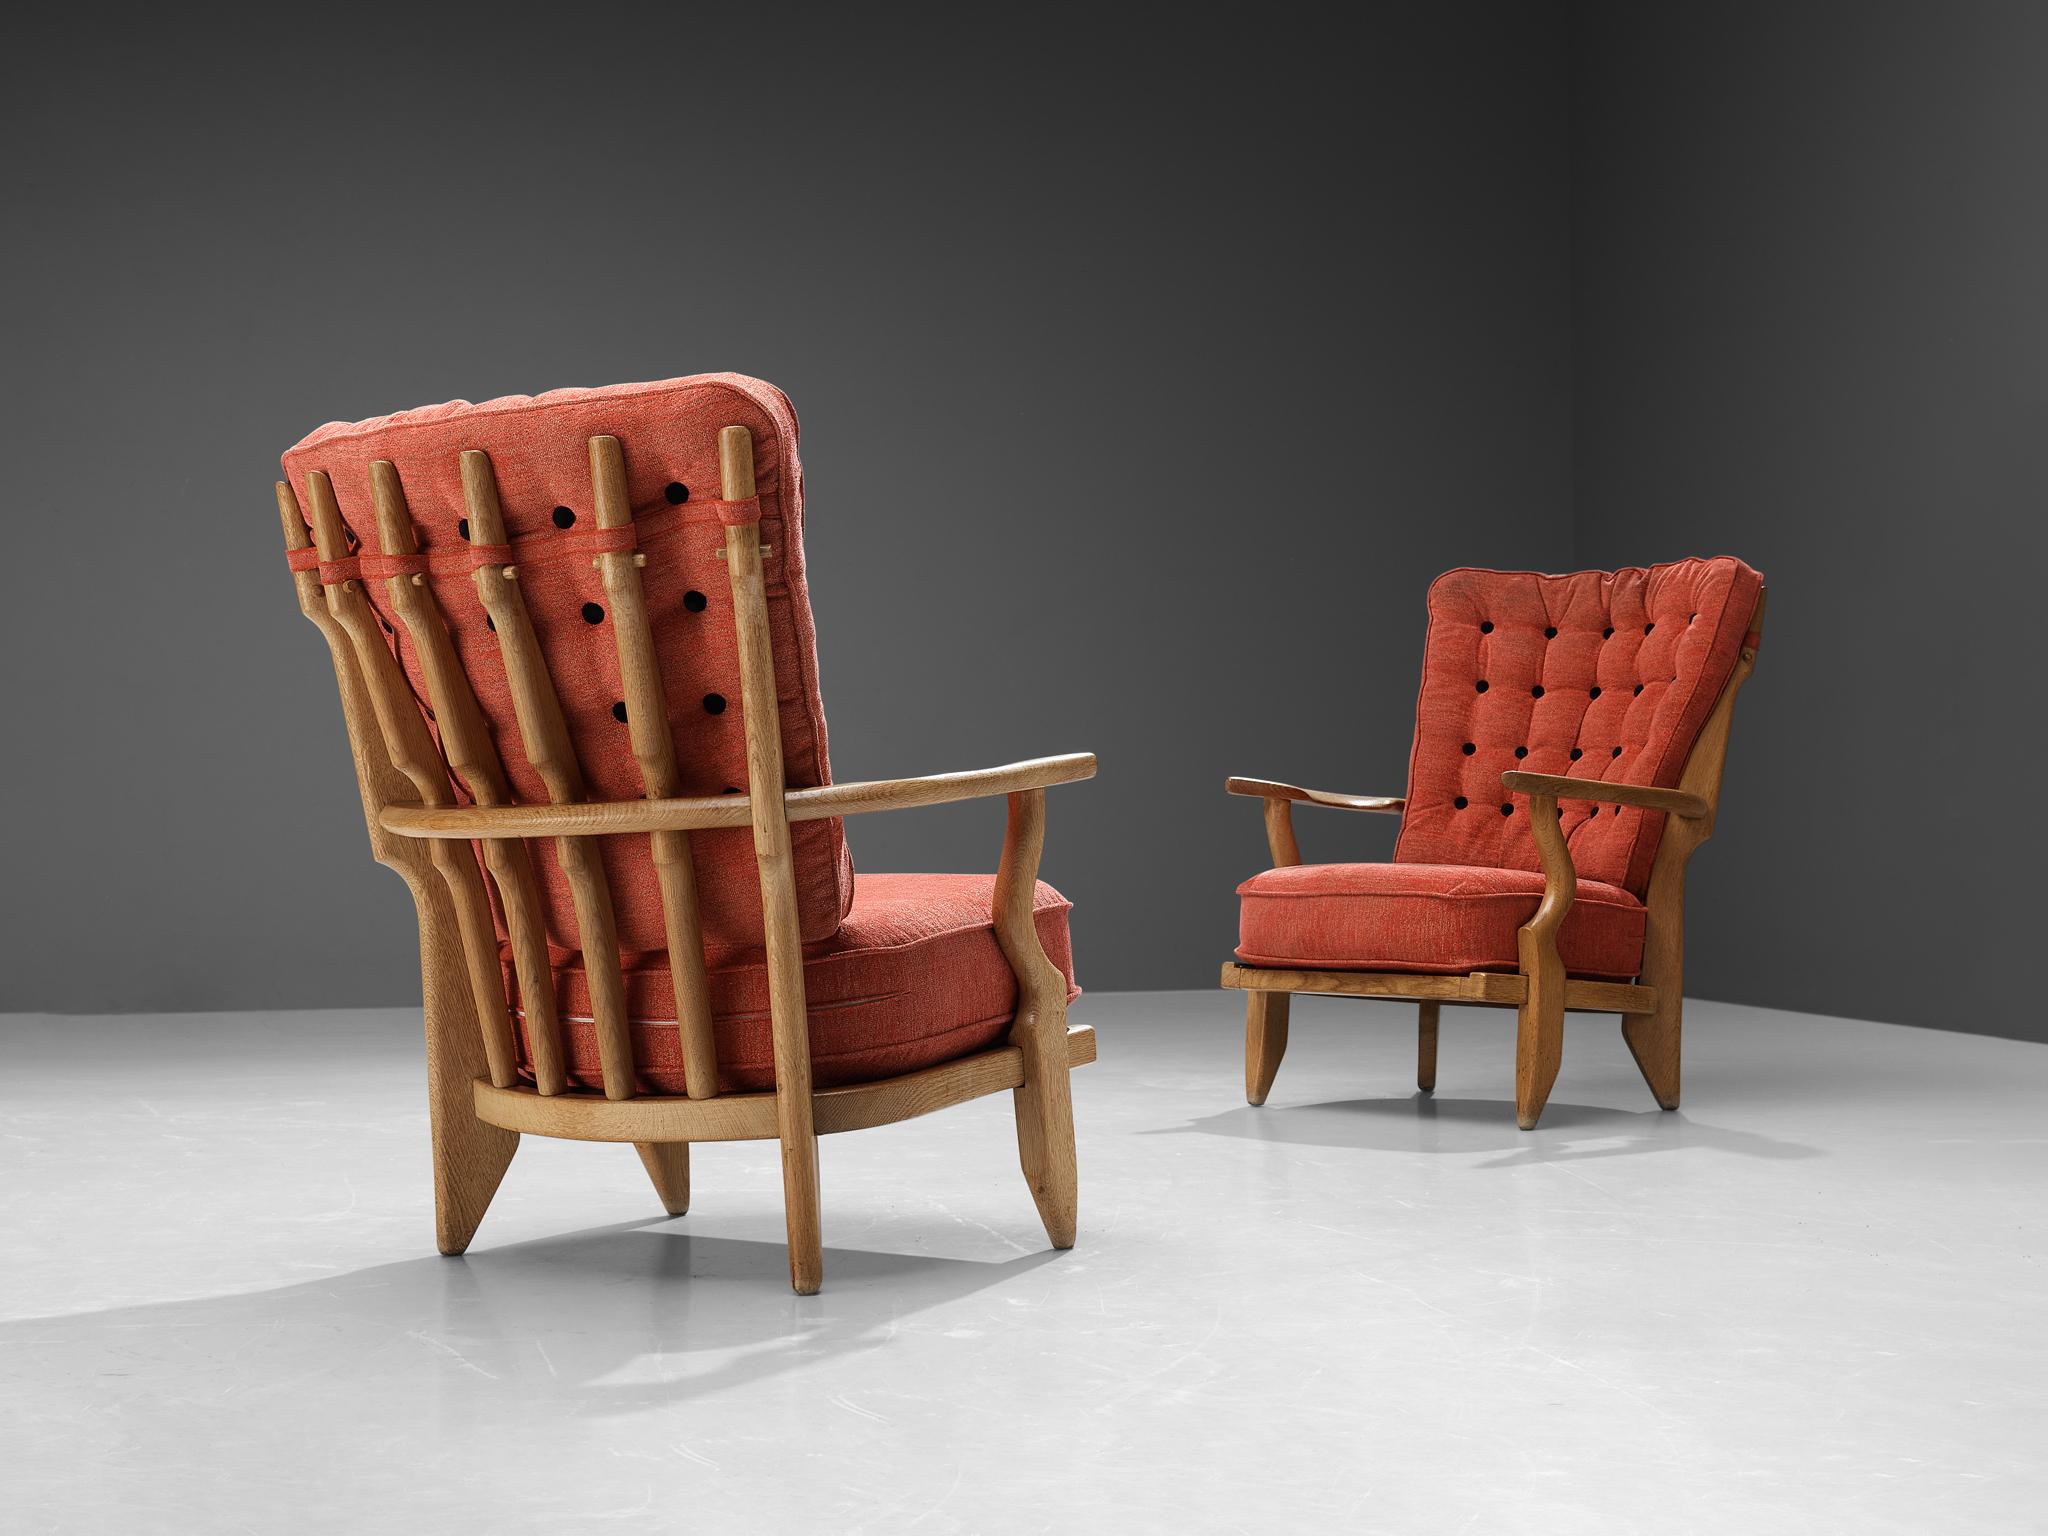 Guillerme et Chambron, lounge chairs, oak, red upholstery, France, 1960s.

Well sculpted Guillerme and Chambron 'Mid Repos' lounge chairs in solid oak with the typical characteristic decorative details at the back and capricious forms of the legs.